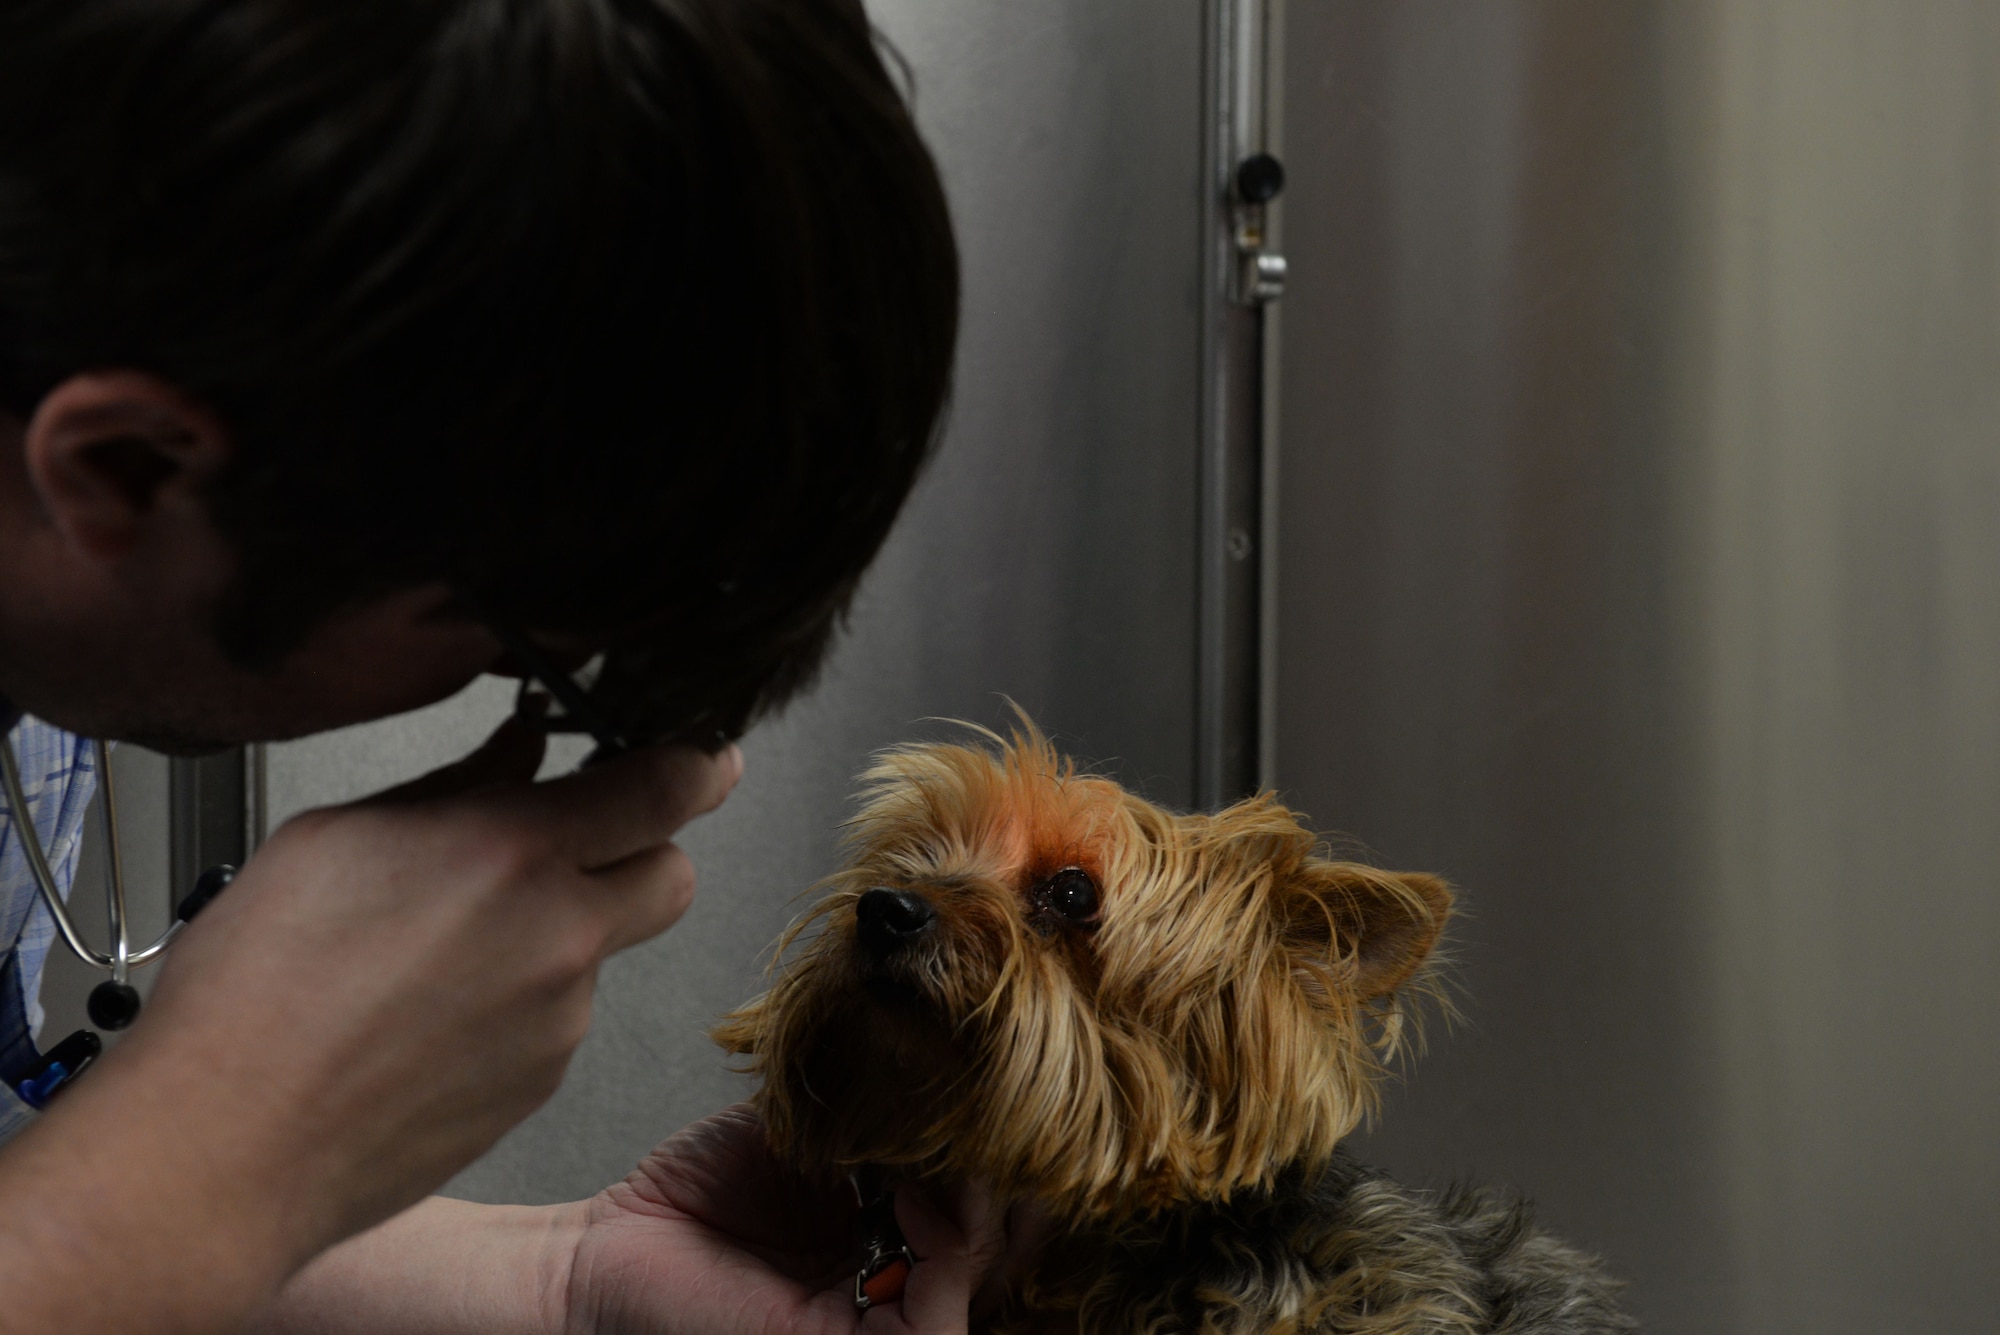 Dr. Leland Raymond, 20th Medical Group veterinarian, gives “Stormie” her checkup in the vet clinic at Shaw Air Force Base, S.C., Feb. 6, 2018.